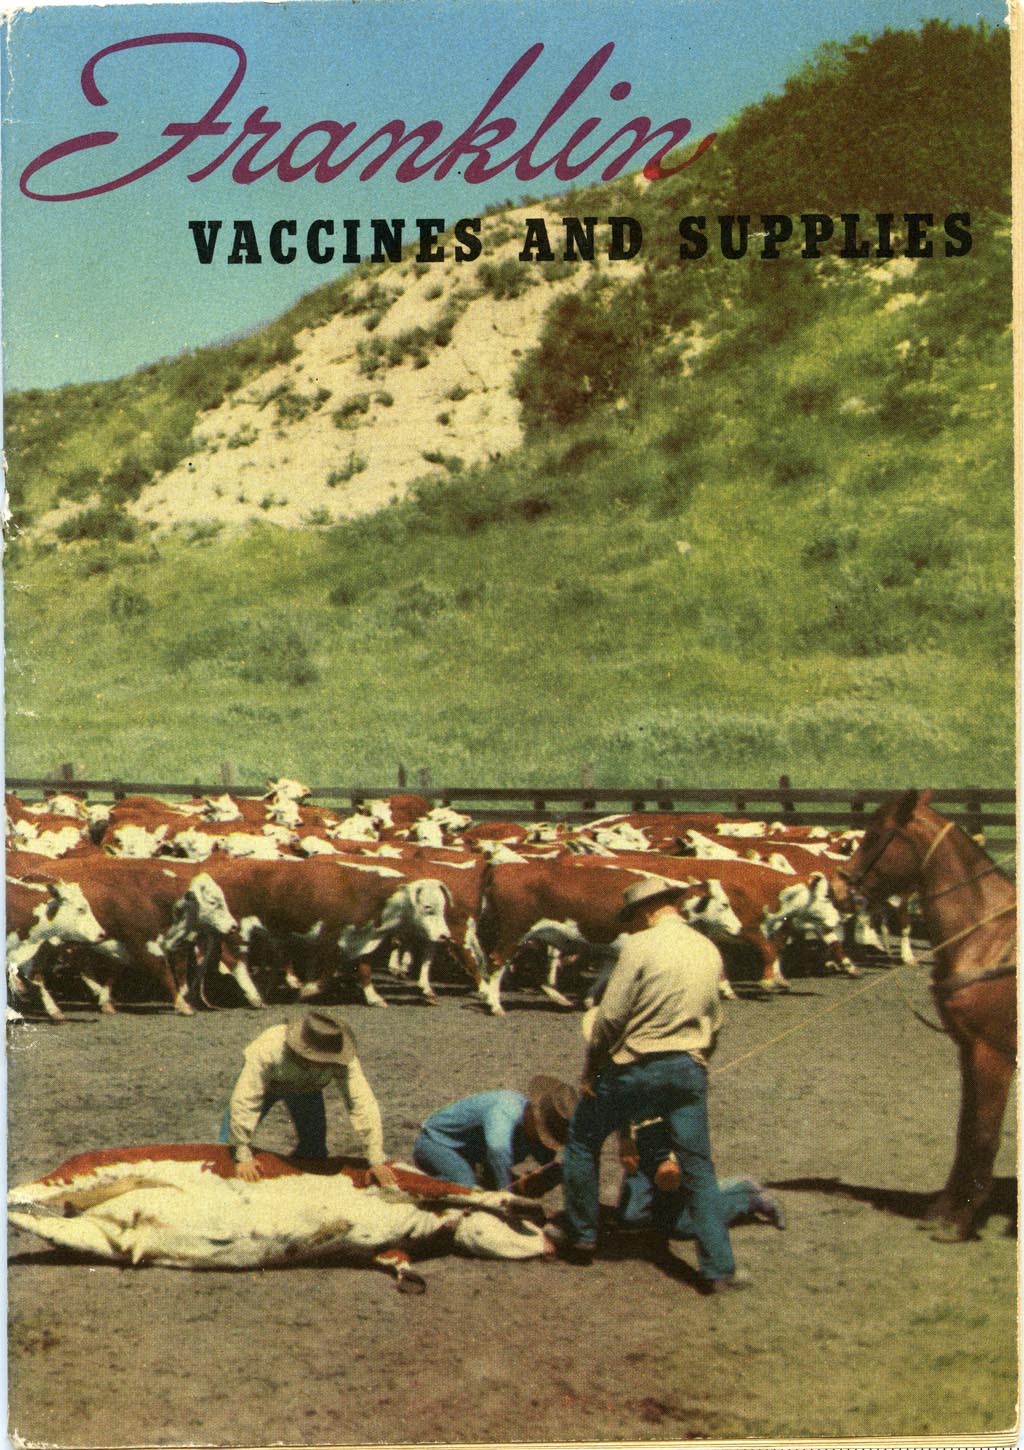 Franklin Vaccines and Supplies